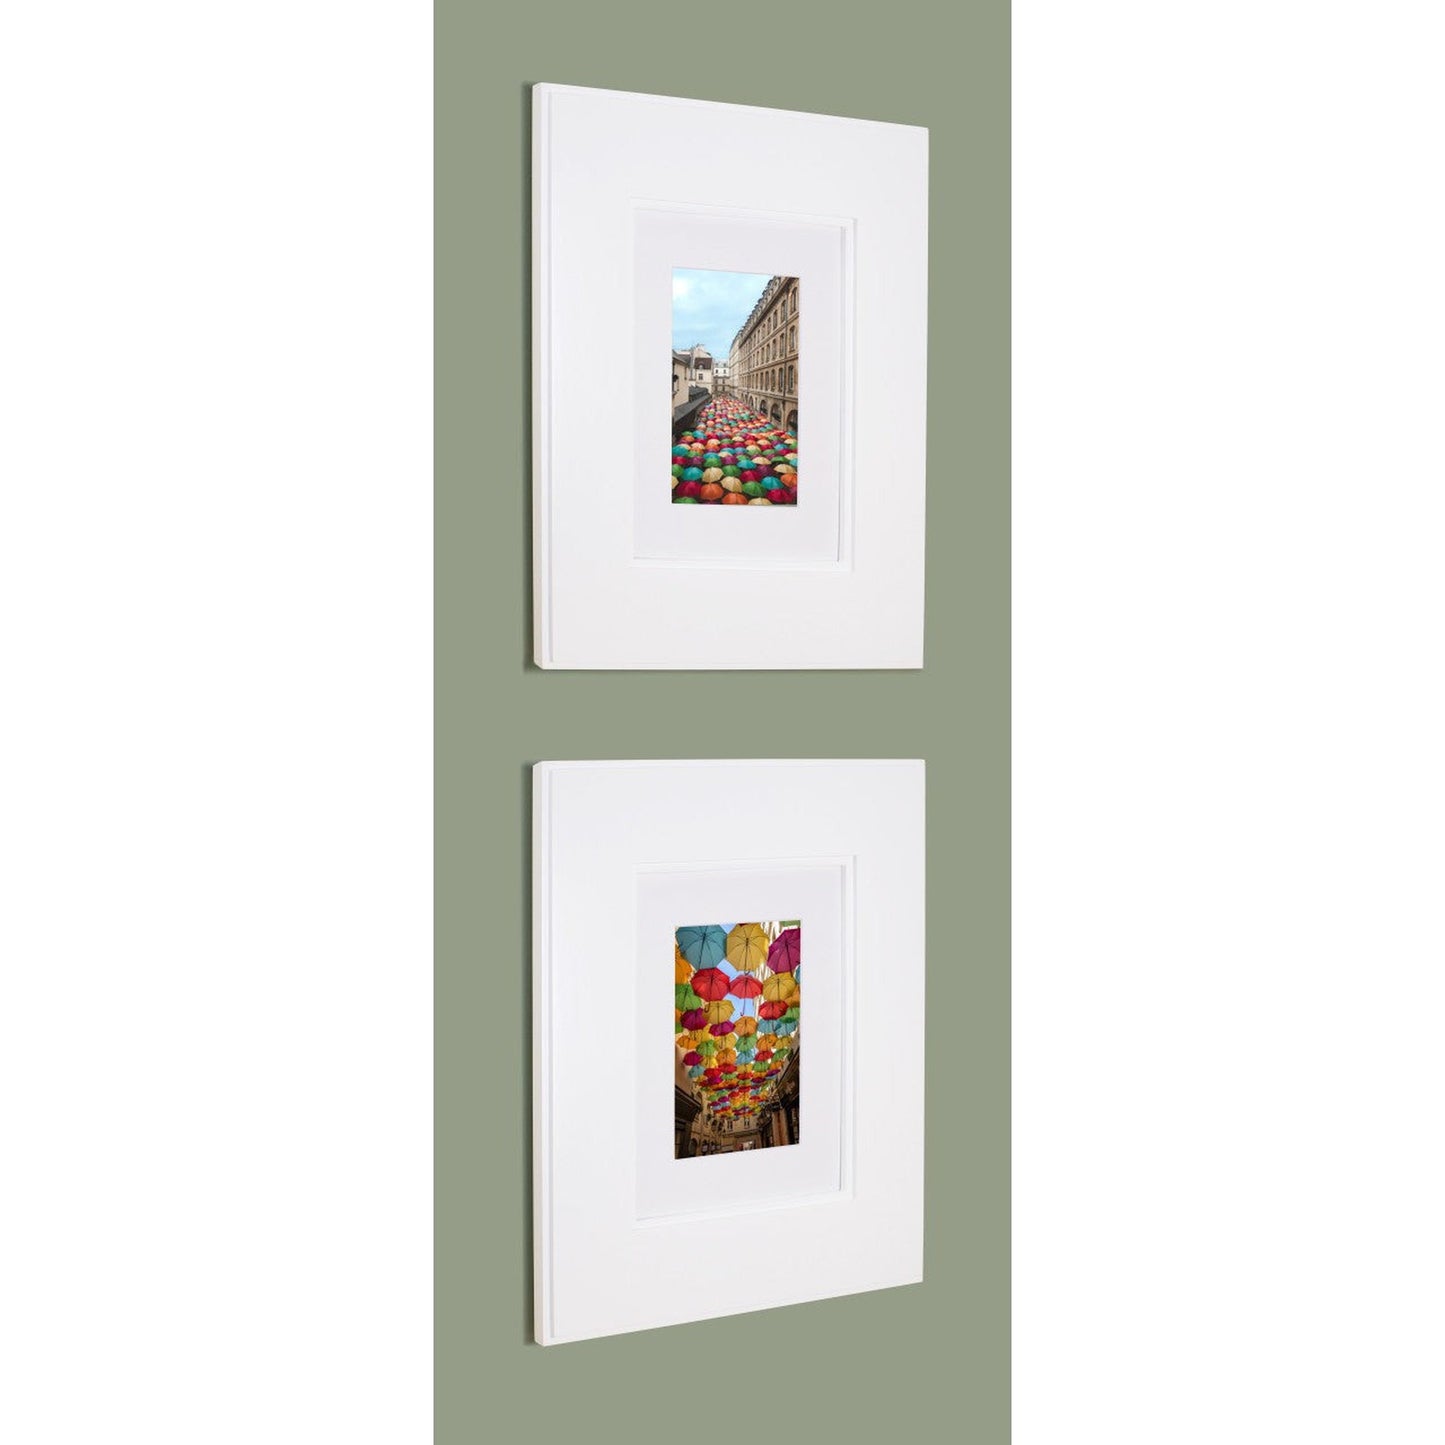 Fox Hollow Furnishings 11" x 14" White Compact Portrait Shaker Standard Depth Recessed Picture Frame Medicine Cabinet With White Matting